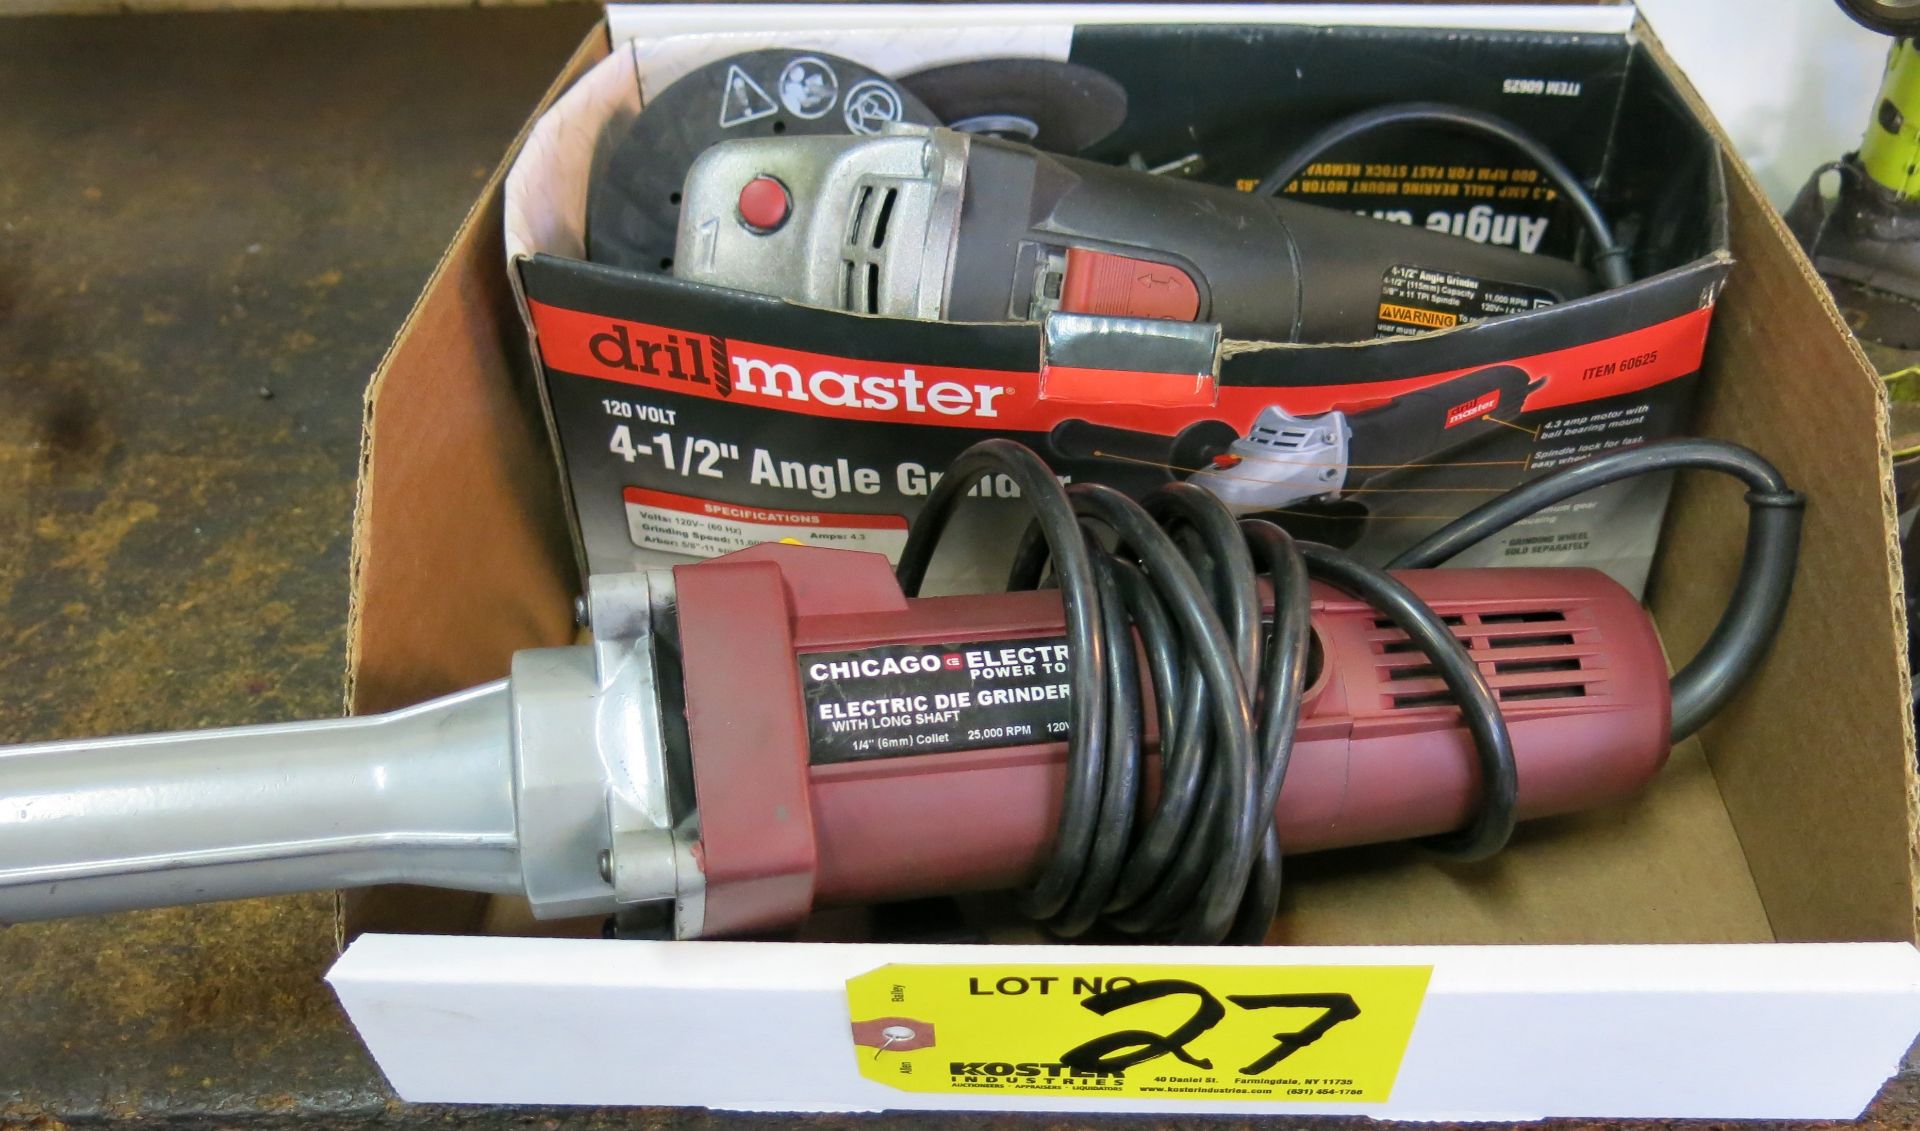 (1) CHICAGO ELECTRIC ELECTRIC DIE GRINDER, (1) DRILL MASTER 4-1/2" ANGLE GRINDER